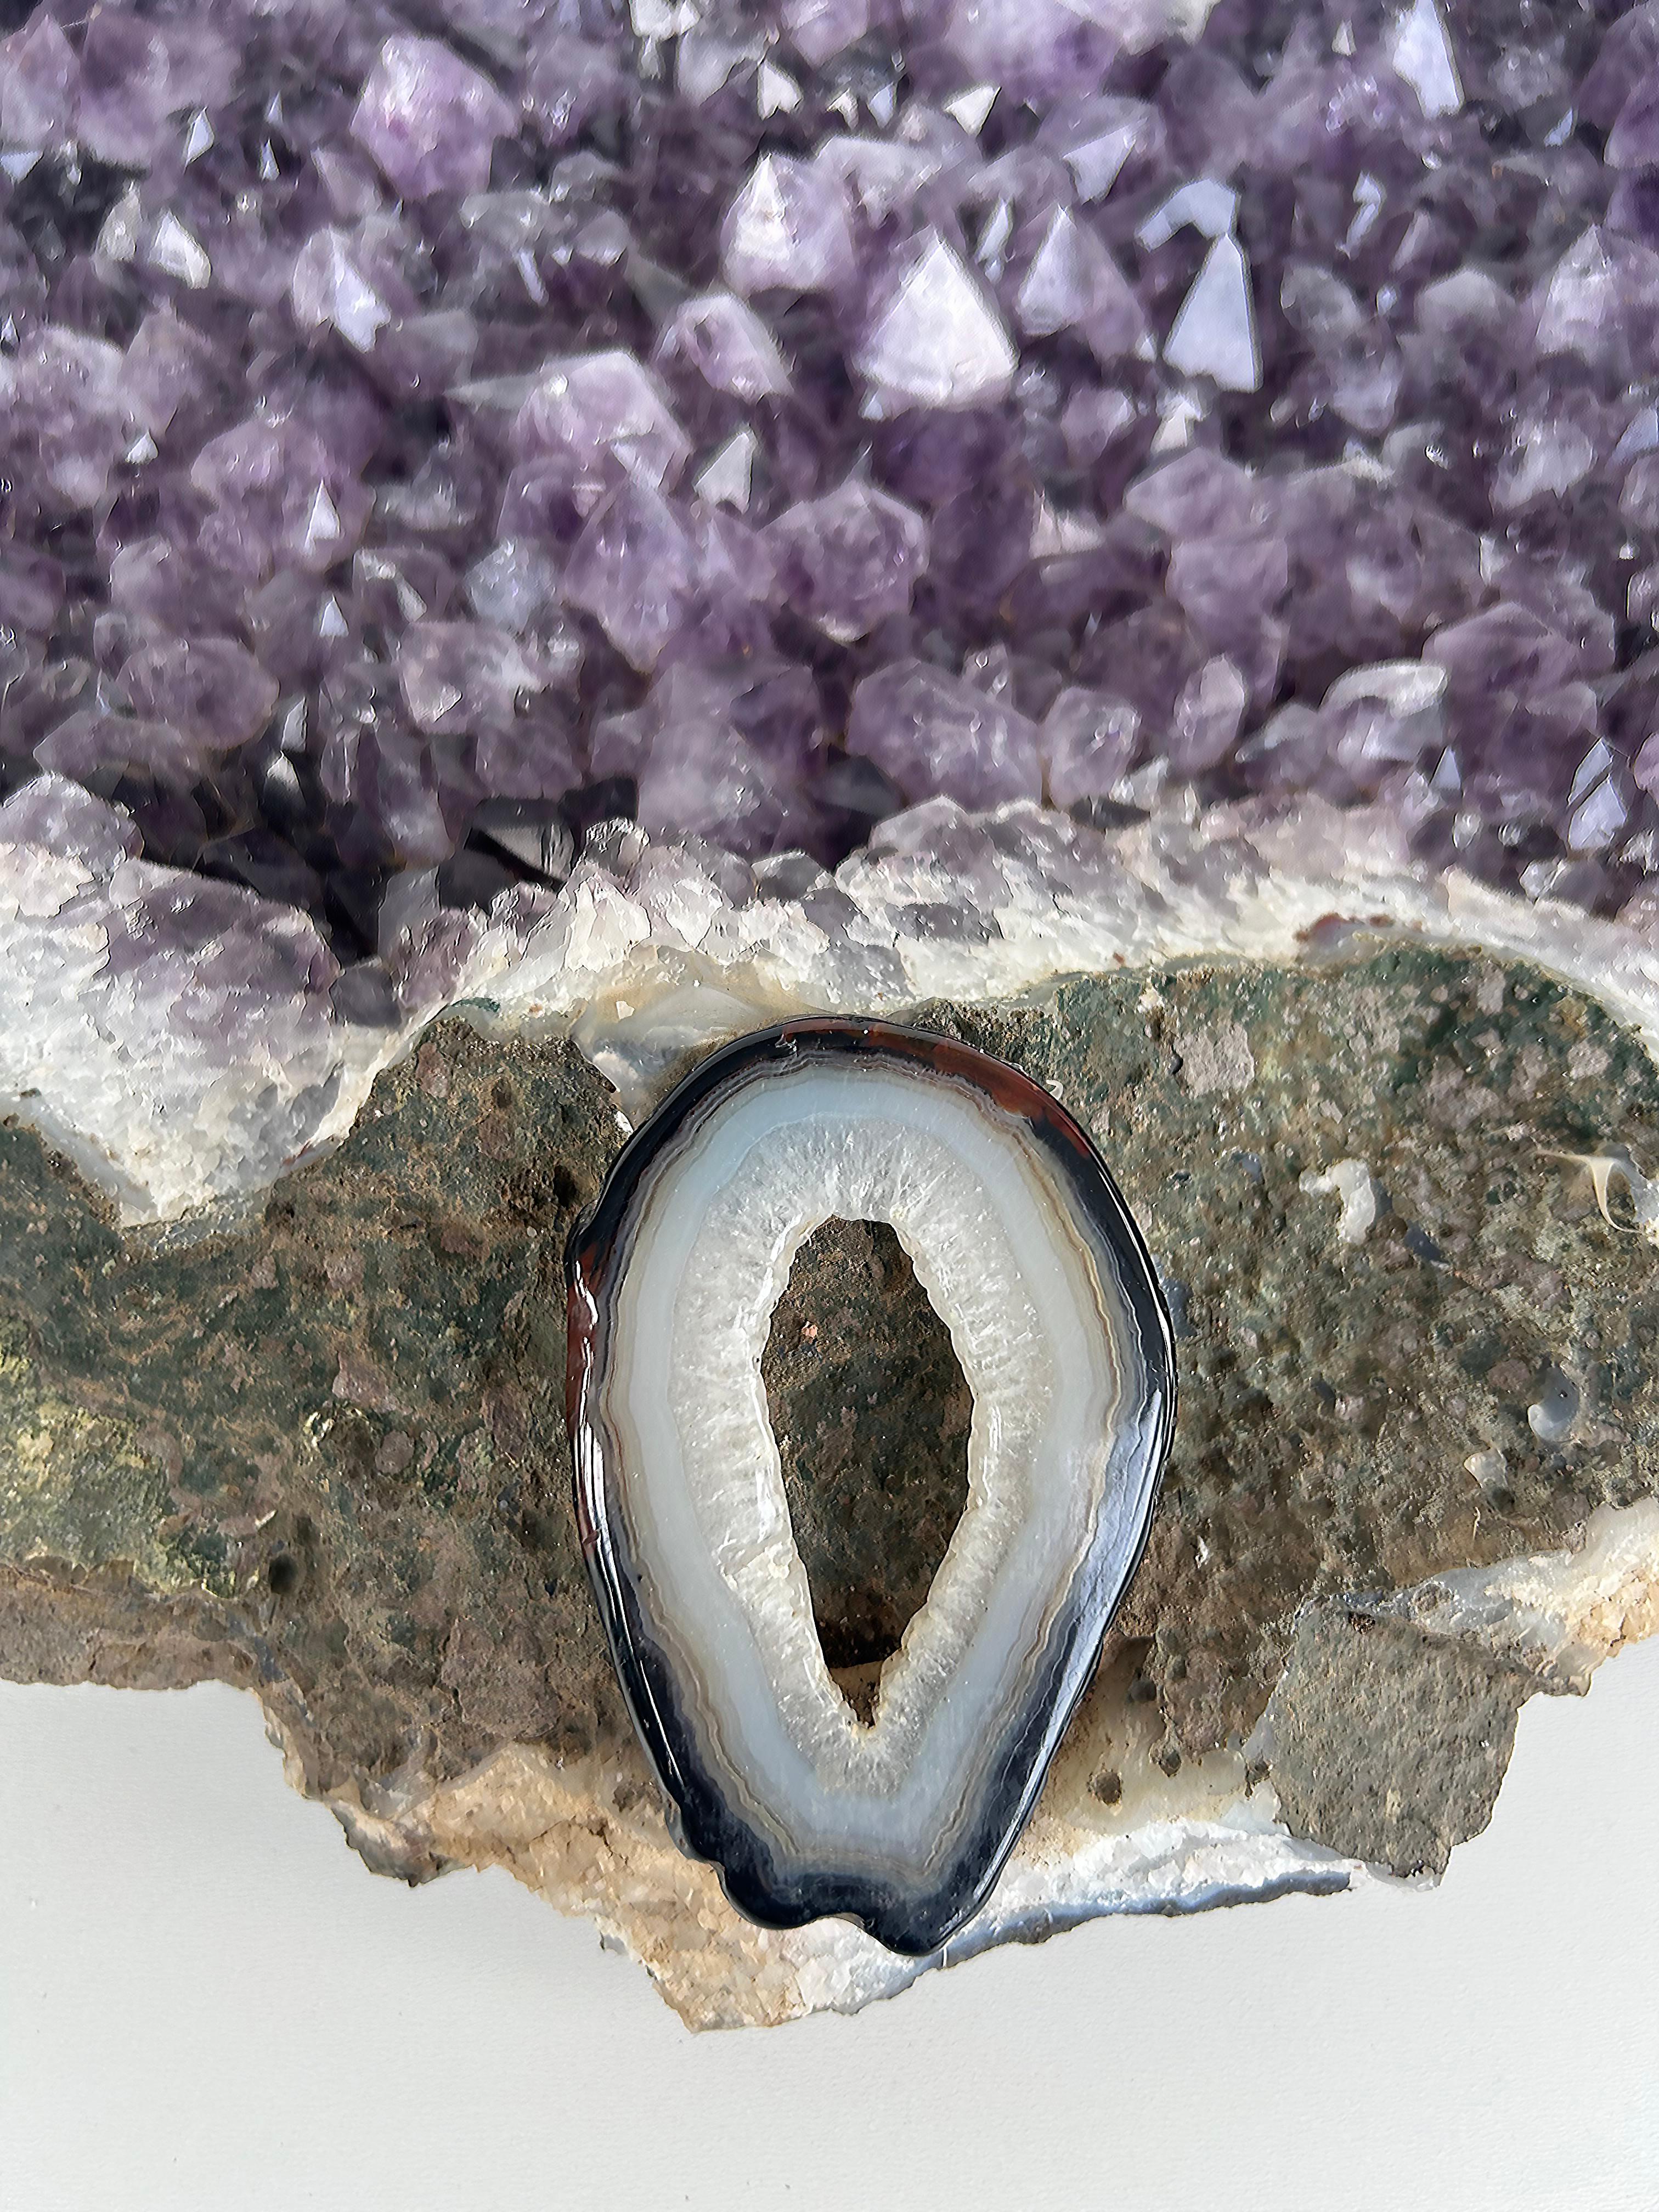 Large Amethyst Quartz Crystal Natural Specimen Geode, 26 pounds 

Offered for sale is an Amethyst cluster crystal geode. The piece is a deep purple crystal within an open end of amethyst with quartz surrounding the edges. The back is uncut and raw.